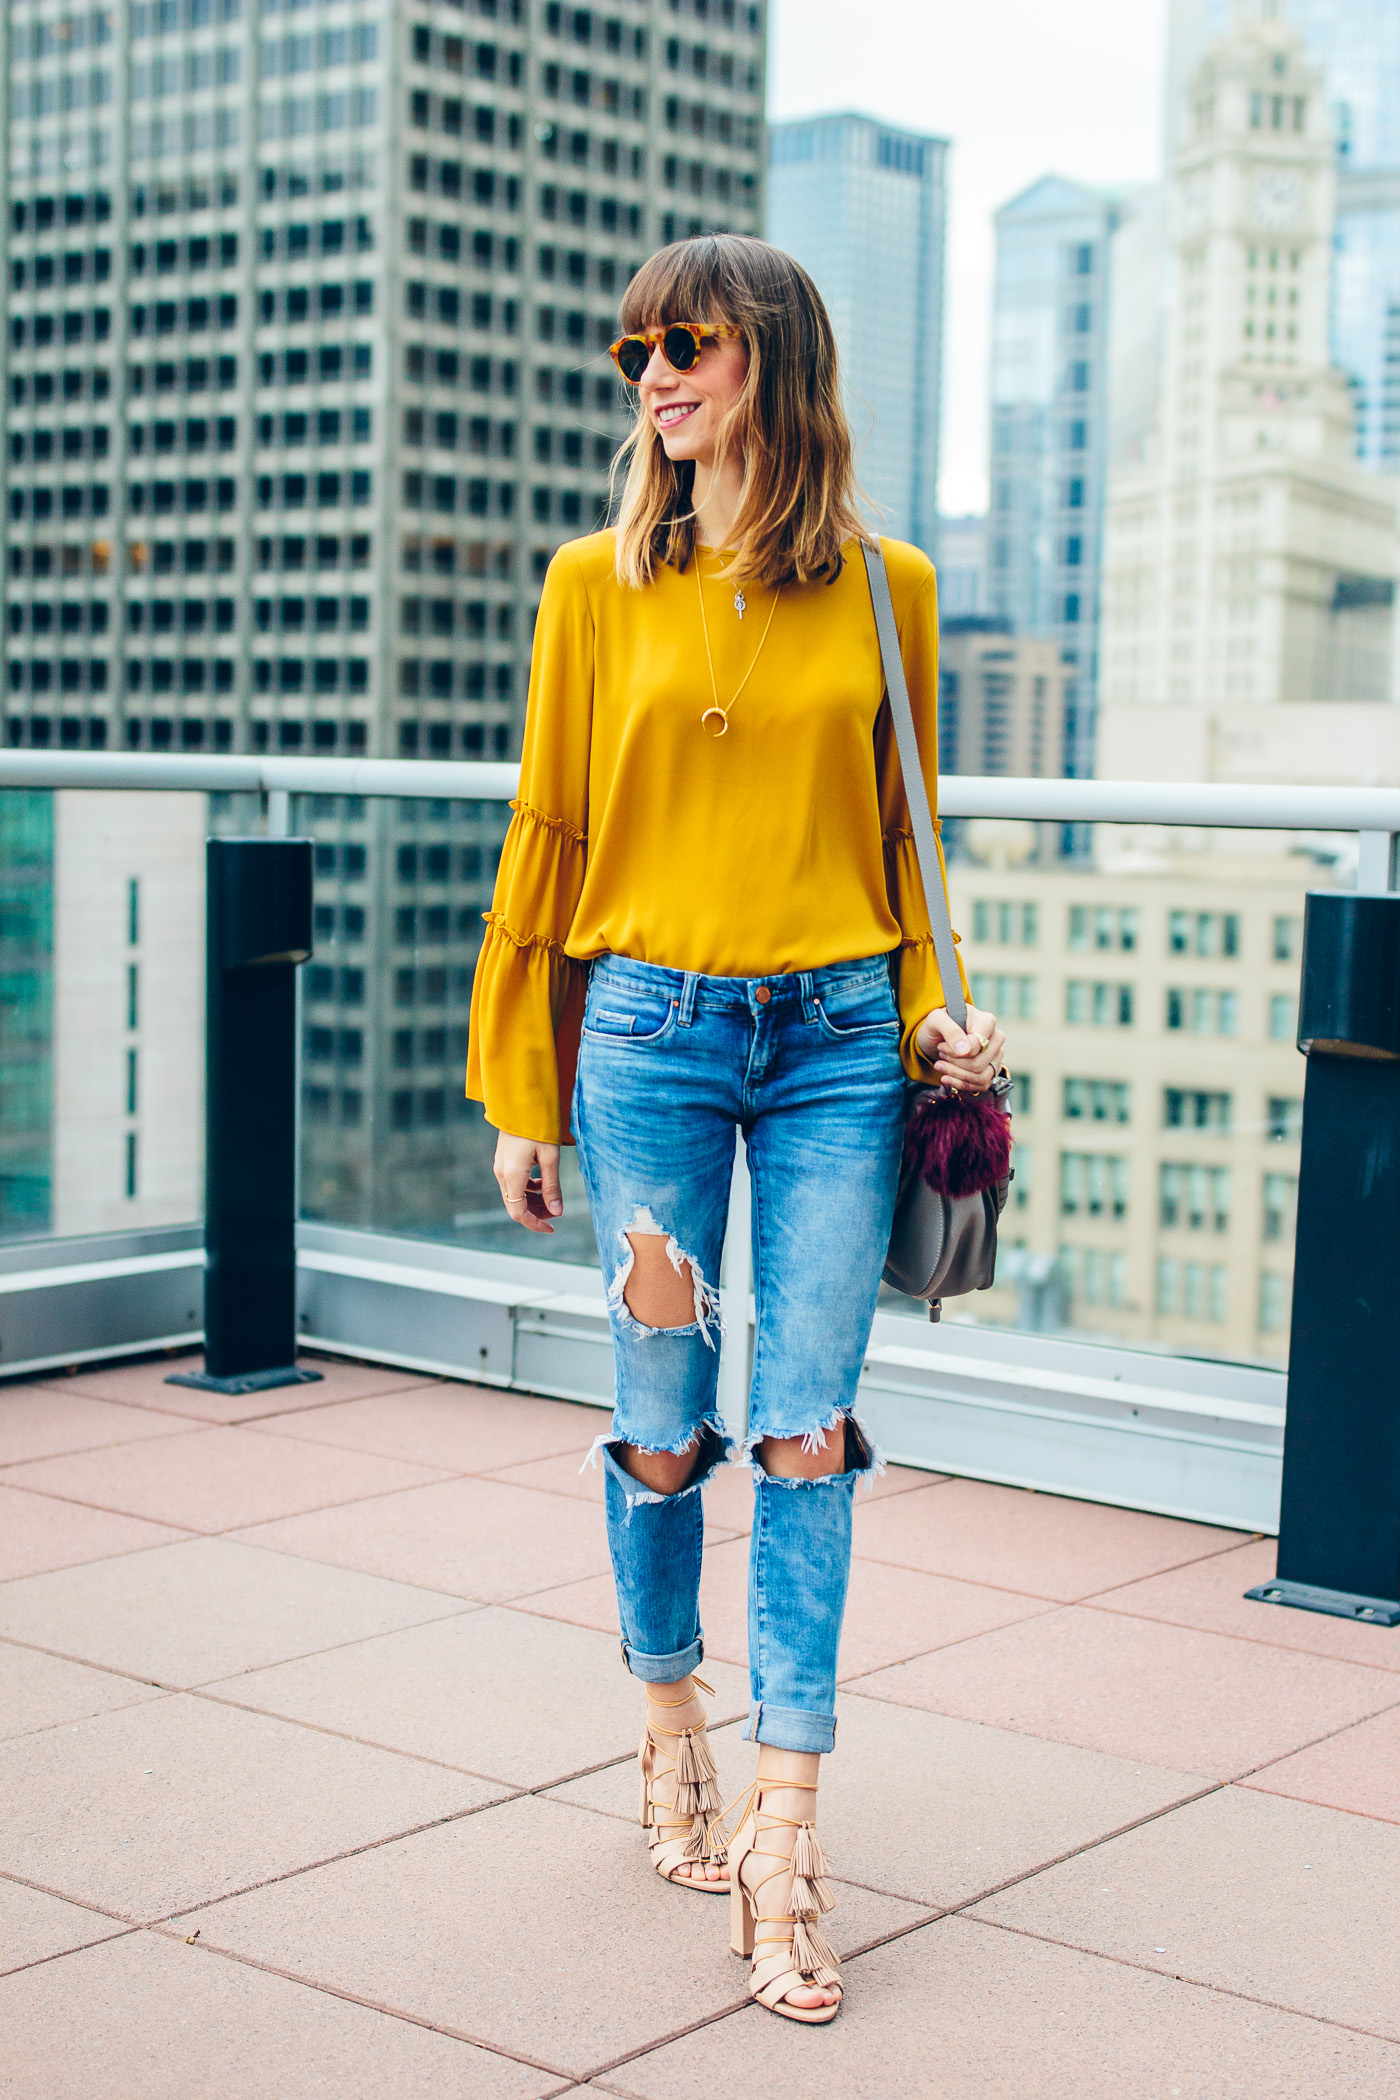 Chicago Fashion blogger, Blair Staky wearing ripped jeans, bell sleeve shirt and tassel heels